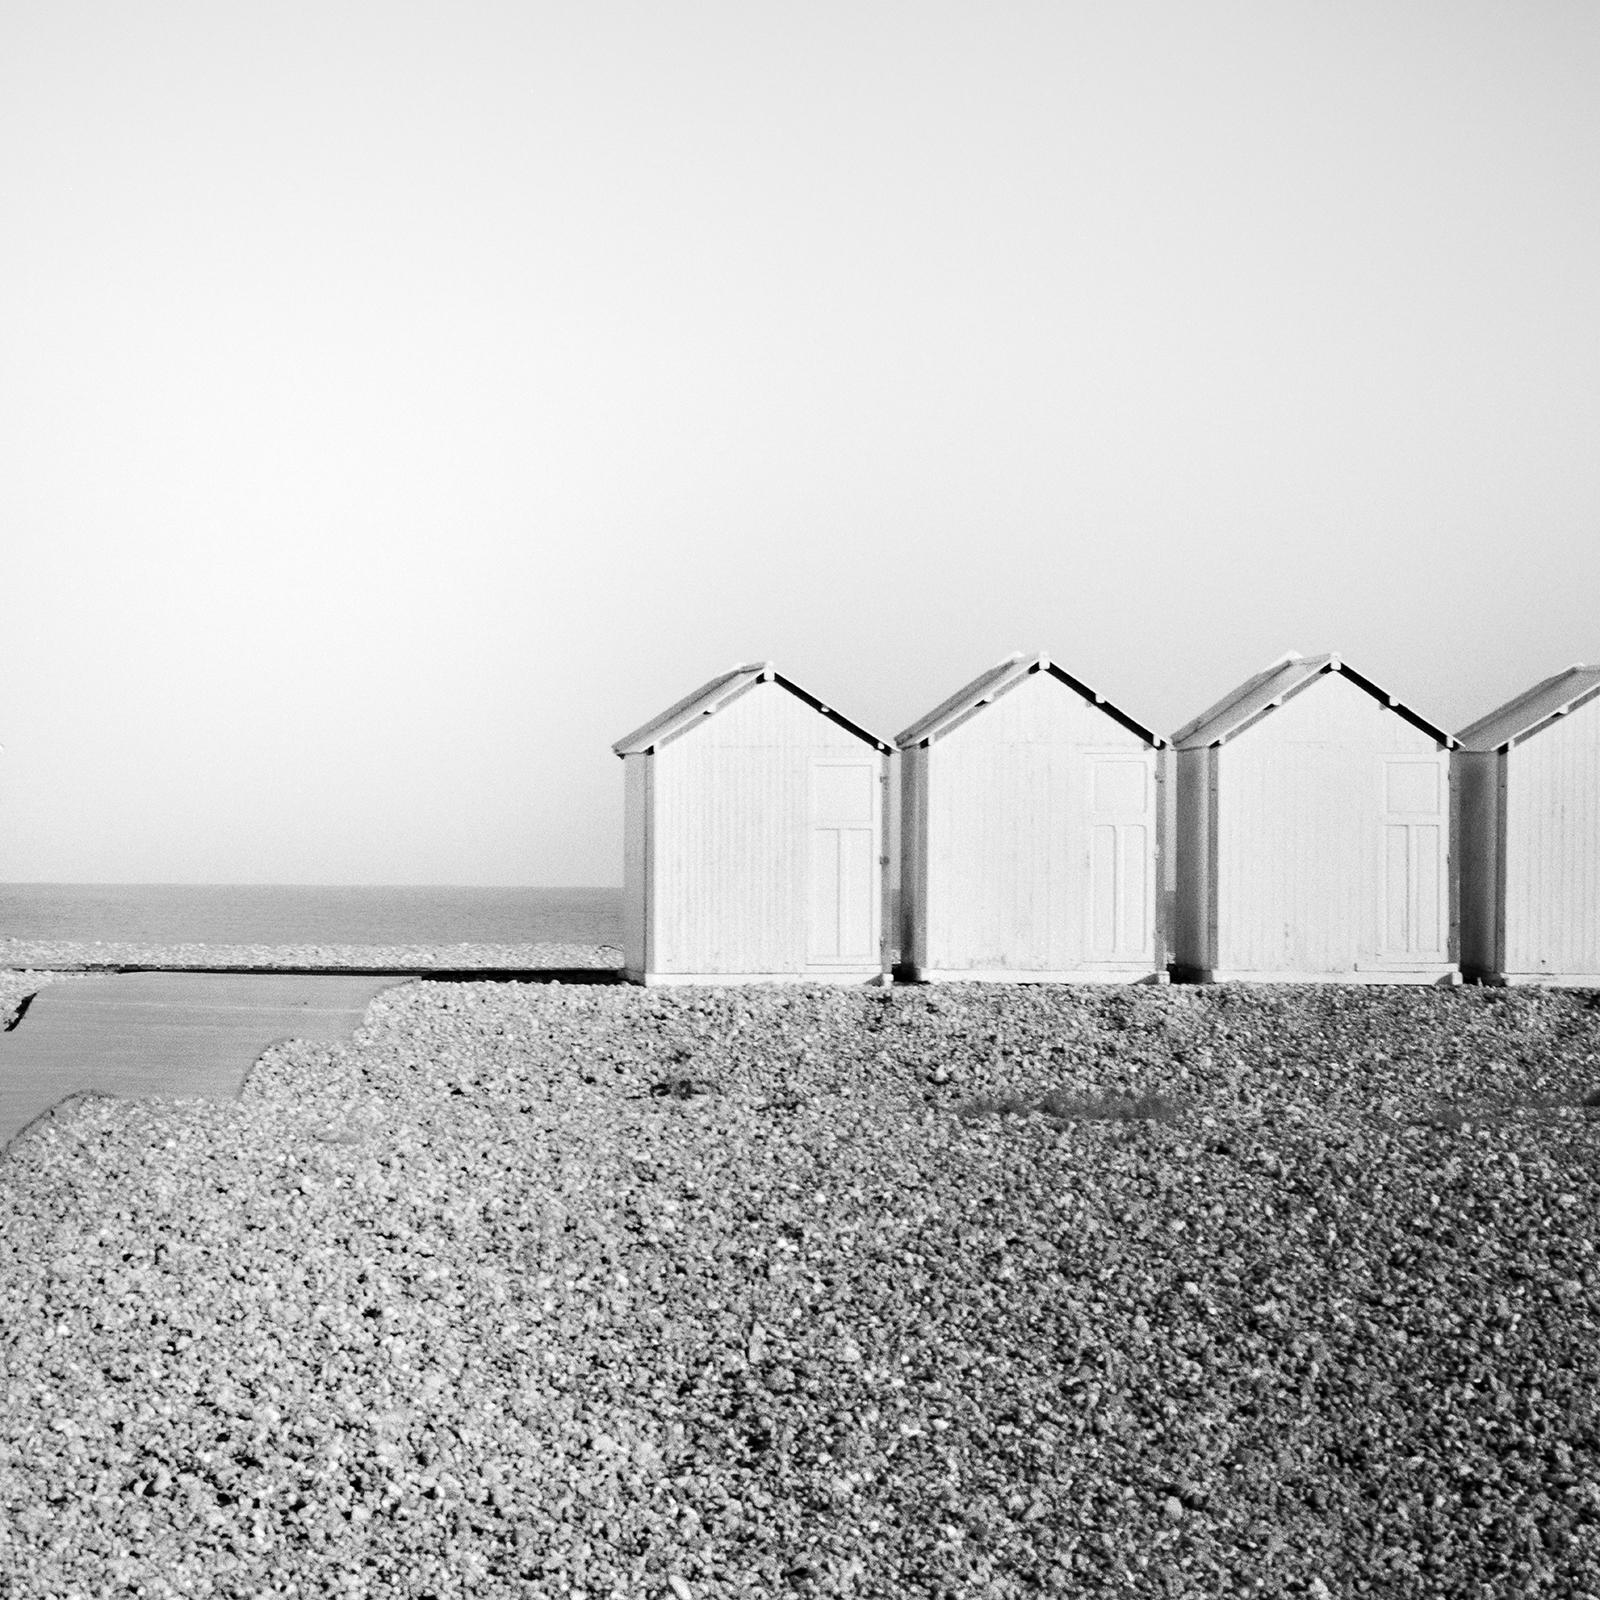 Wood Huts, Promenade, Rocky Beach, France, black and white landscape photography For Sale 5